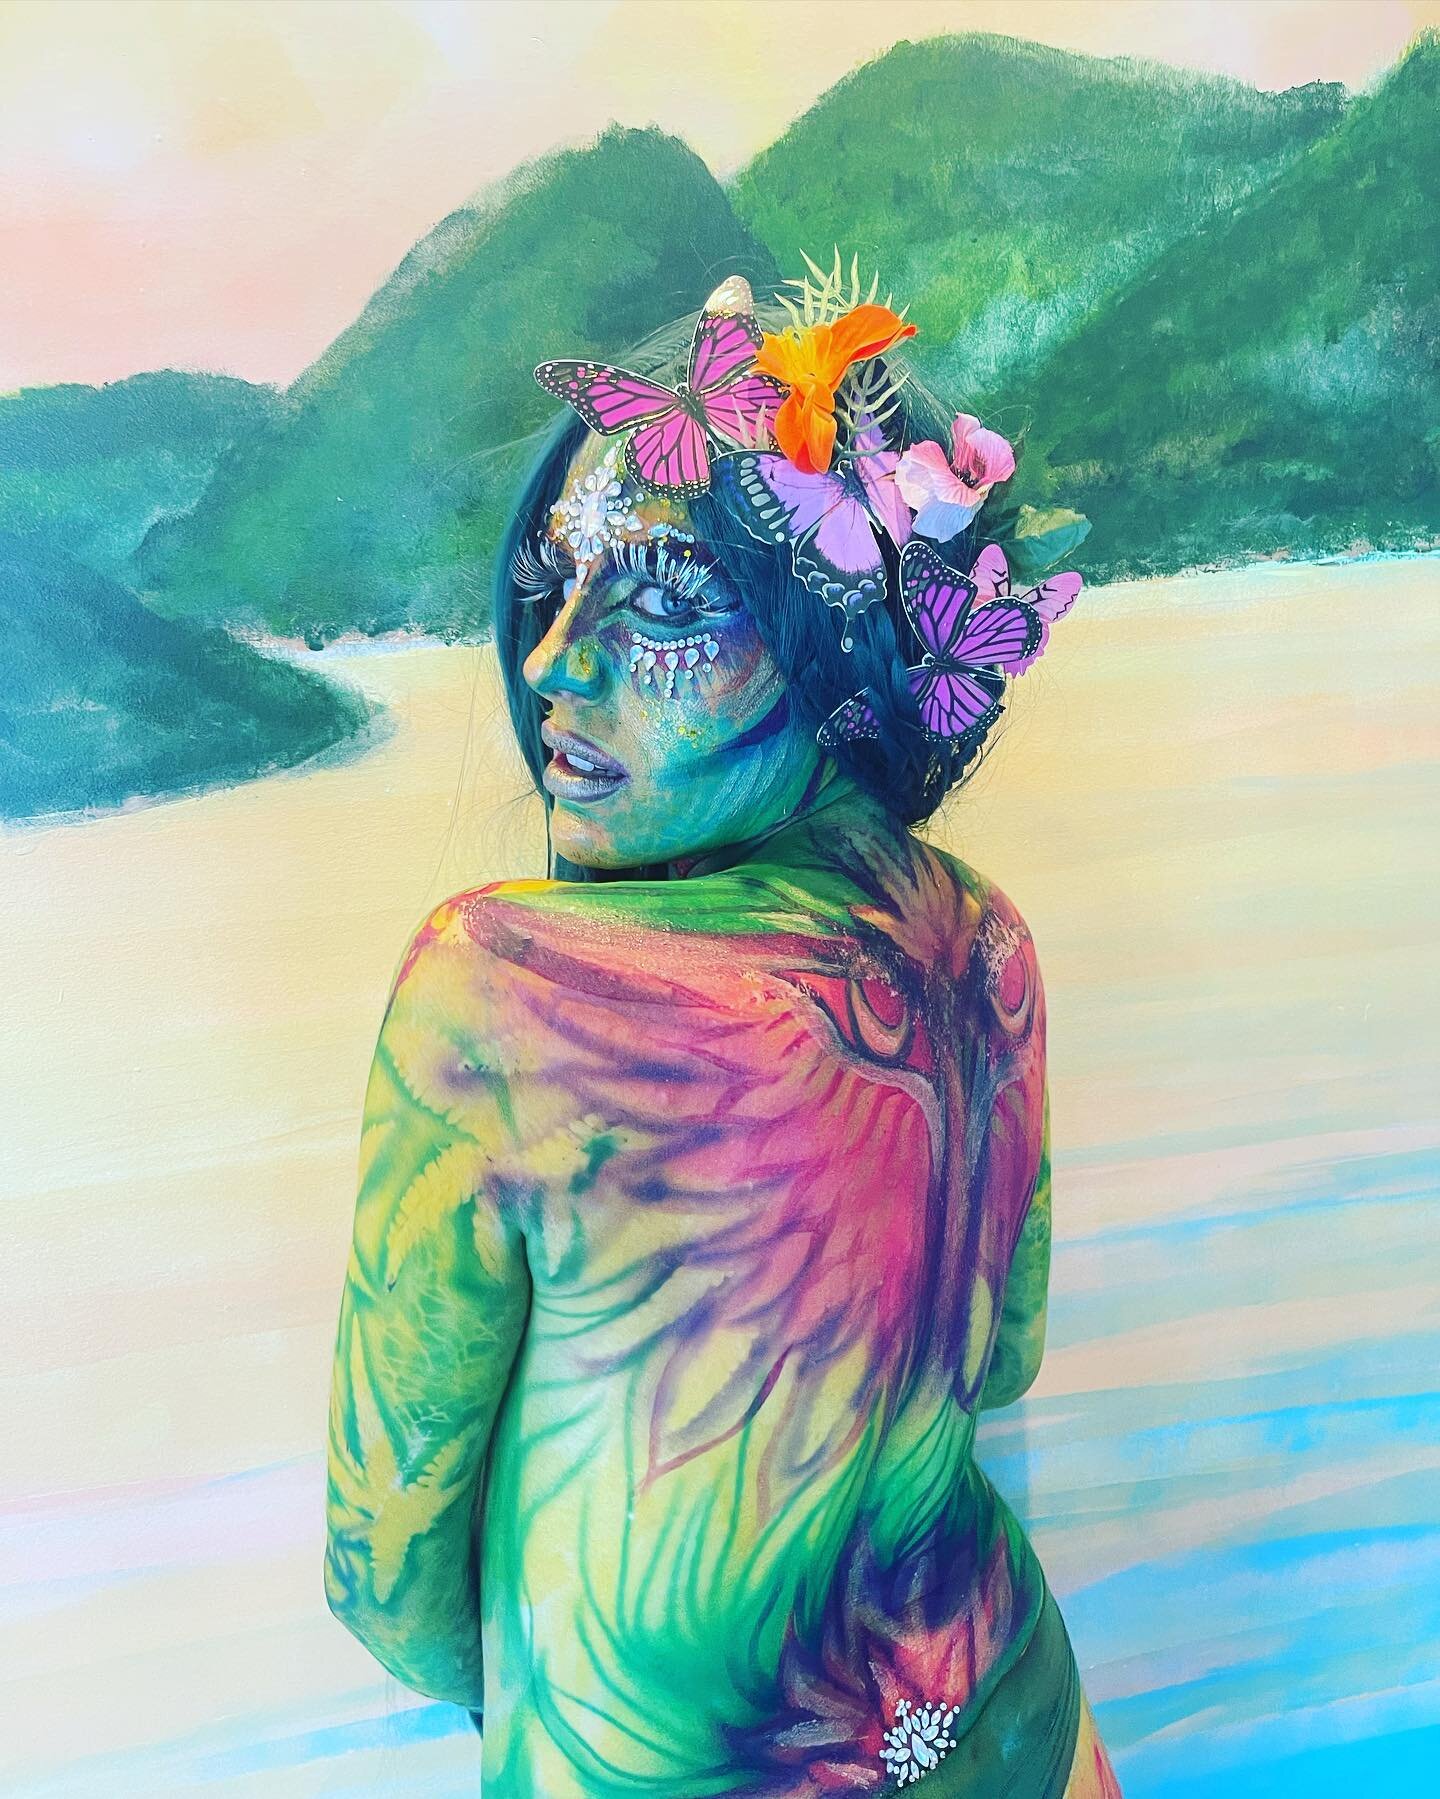 Jah Bless 🍀💛❤️&zwj;🔥🍃🦋🌞
Filming on location in Squamish for @1mwoz new music video celebrating the beauty of nature and lush living 🌸🌼🌻
Director @observe_breathe 
Makeup Artist @gemineye_mua 
.
.
.
#ganjagoddess #healingherb #beautyblessed #